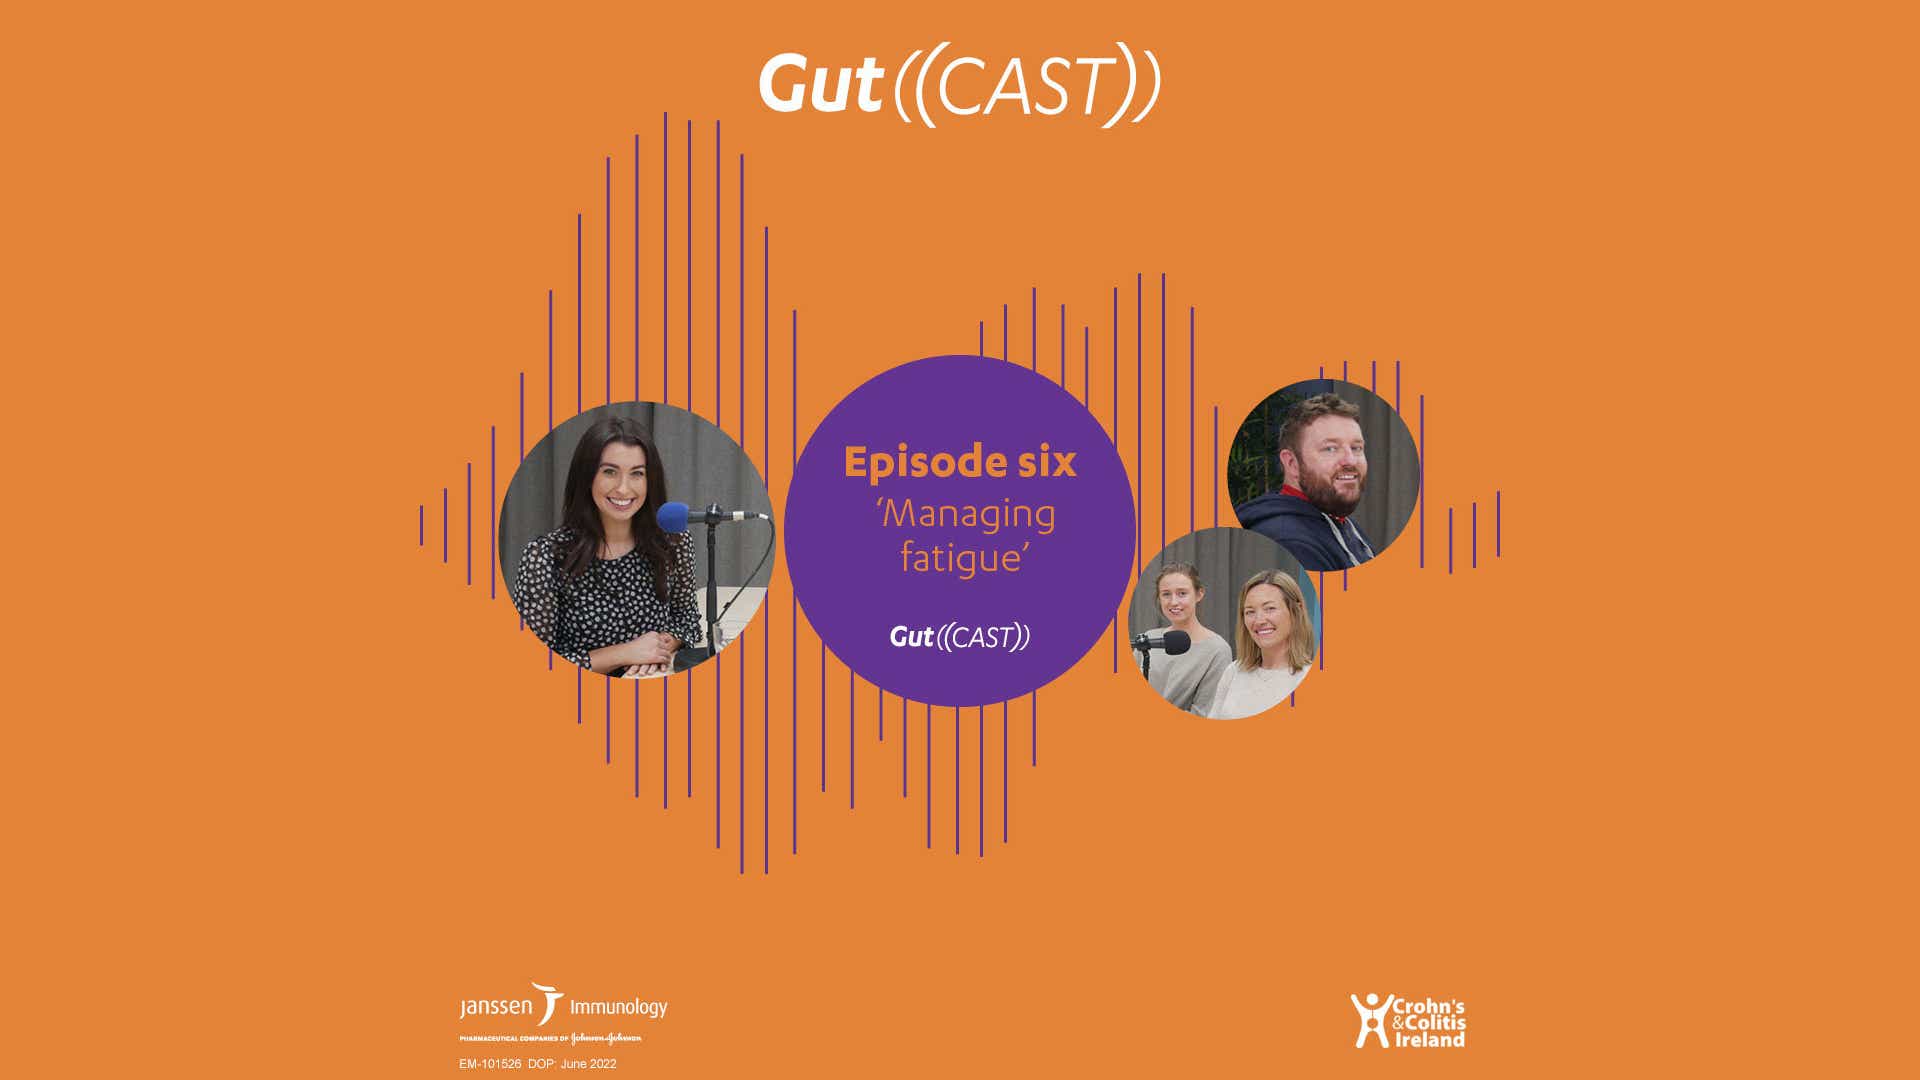 Season one episode six of the podcast series Gutcast named "Managing fatigue".